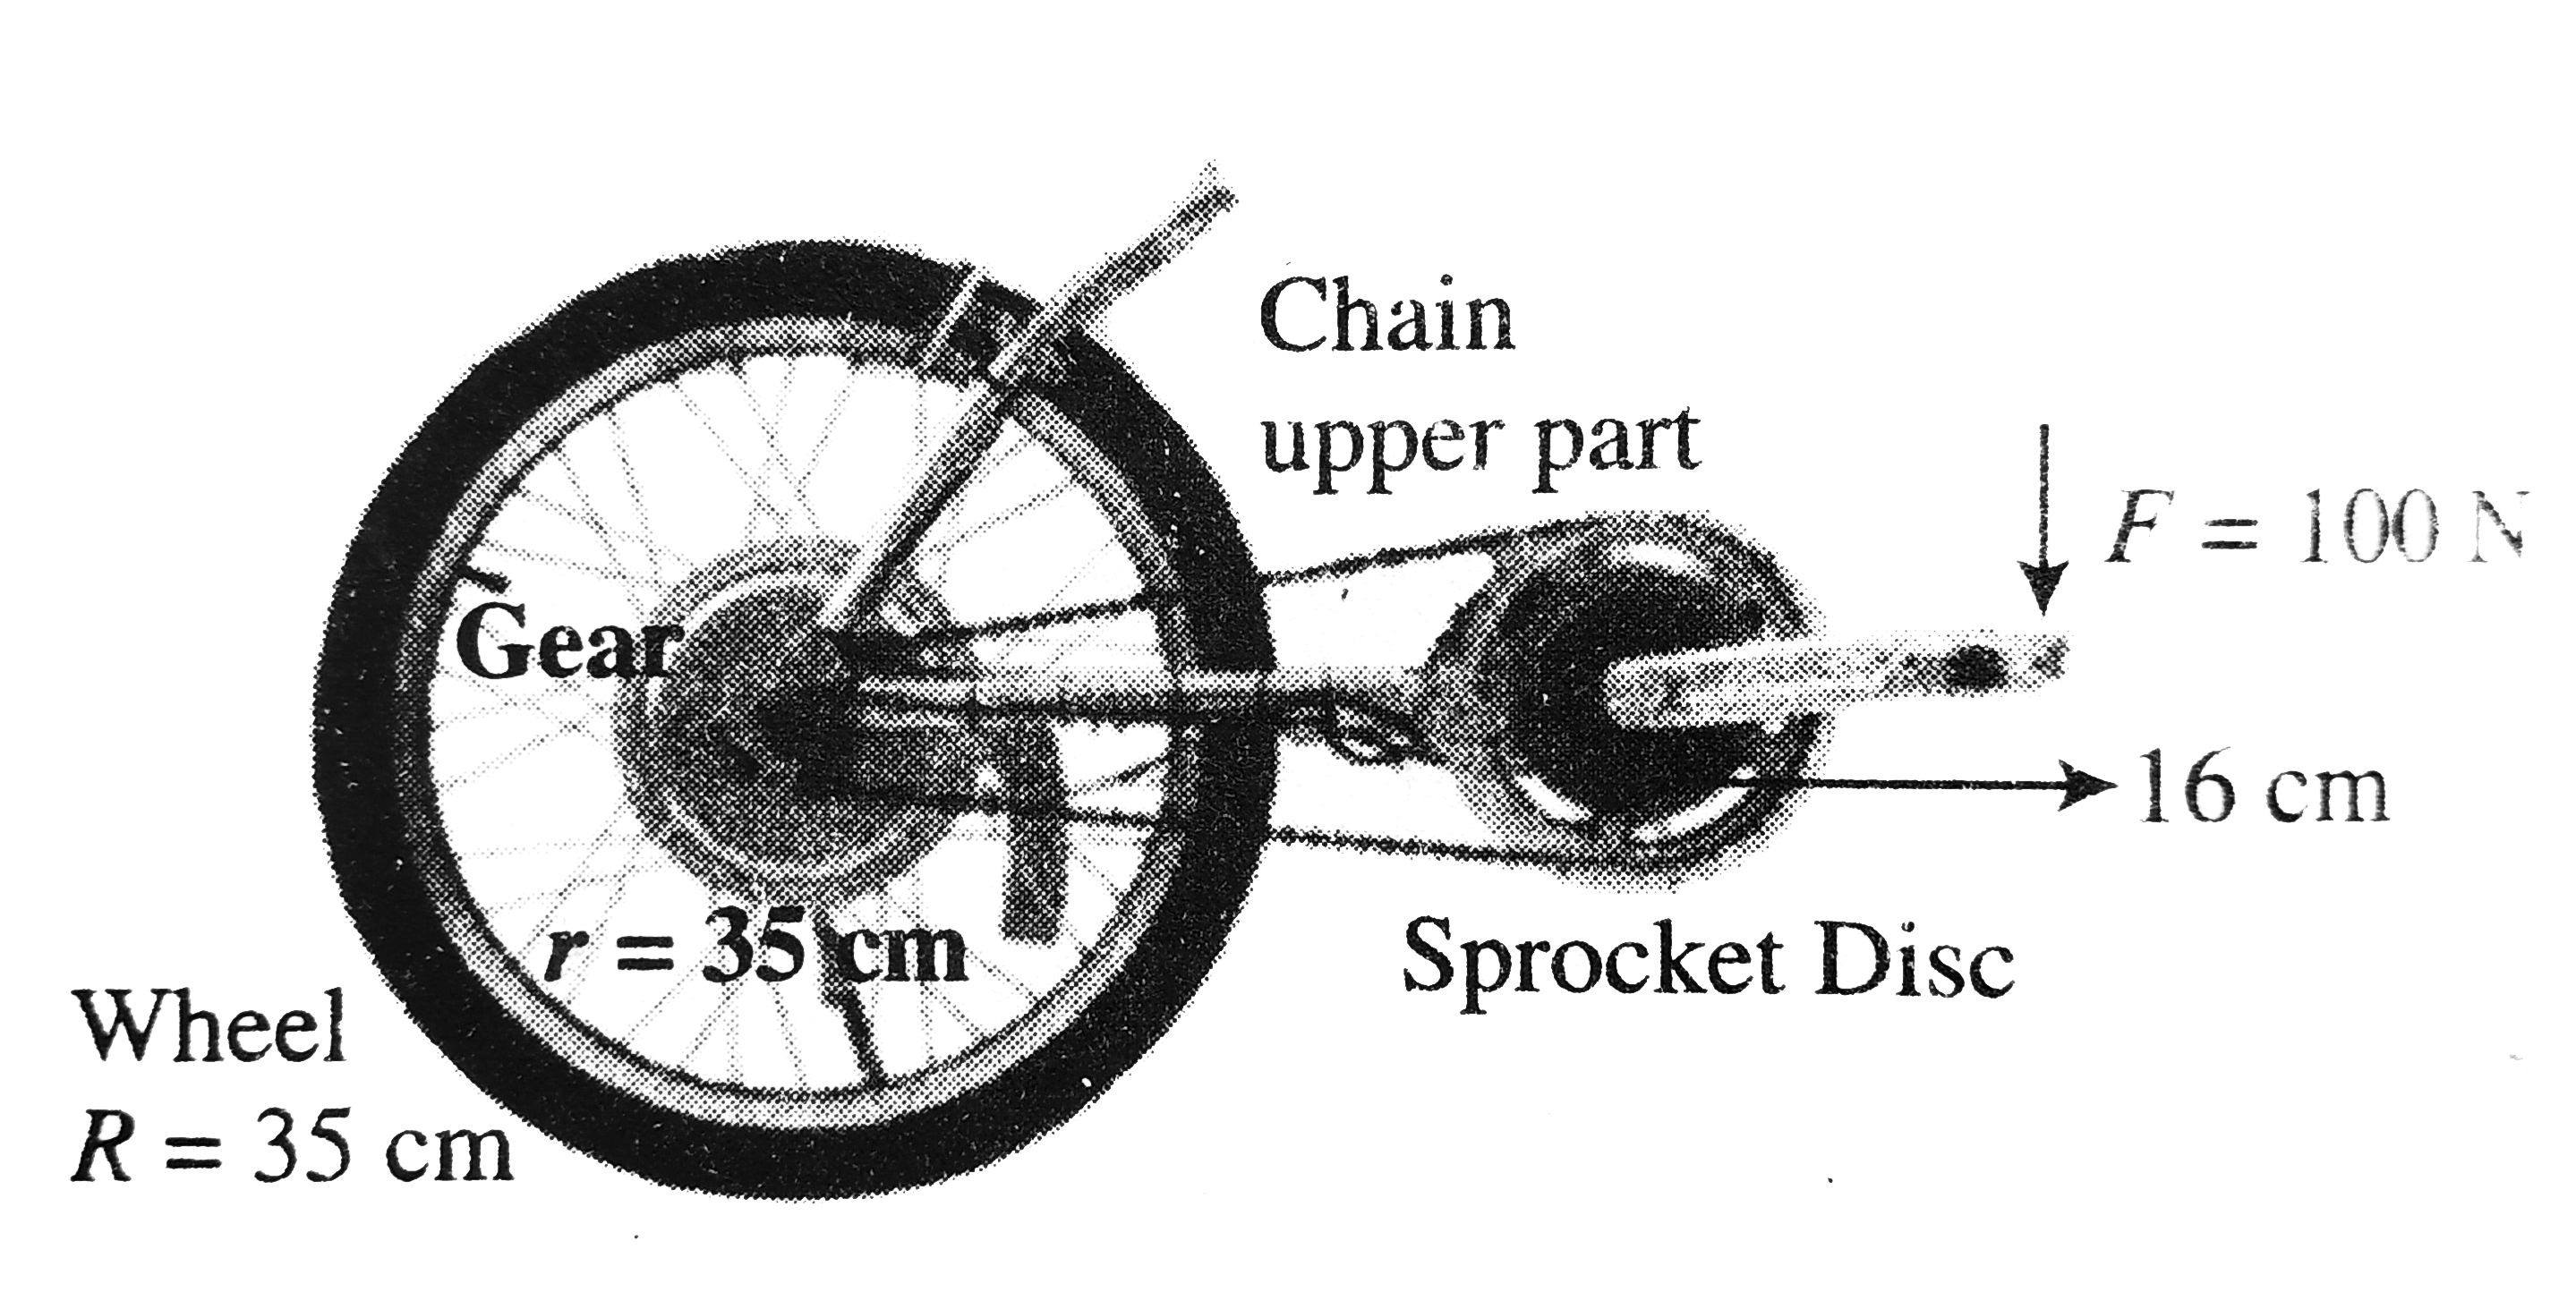 A bicycle has pedal rods of length 16 cm connected to sprocketed disc of radius 10 cm. The bicycle wheels are 70 cm in diameter and the chain runs over a gear of radius 4cm. The speed of the cycle is constant and the cyclist applies 100 N  for, that is always perpendicular to the pedal rod, as shown in figure. Assume tension in the lower part of chain is negligible. The cyclist is peddling at a constant rate of two revolutions per second. Assume that the force applied by other foot is zero when one foot is exerting 100 N force. Neglect friction within cycle parts and the rolling friction.      The tension in the upper portion of the chain is equal to